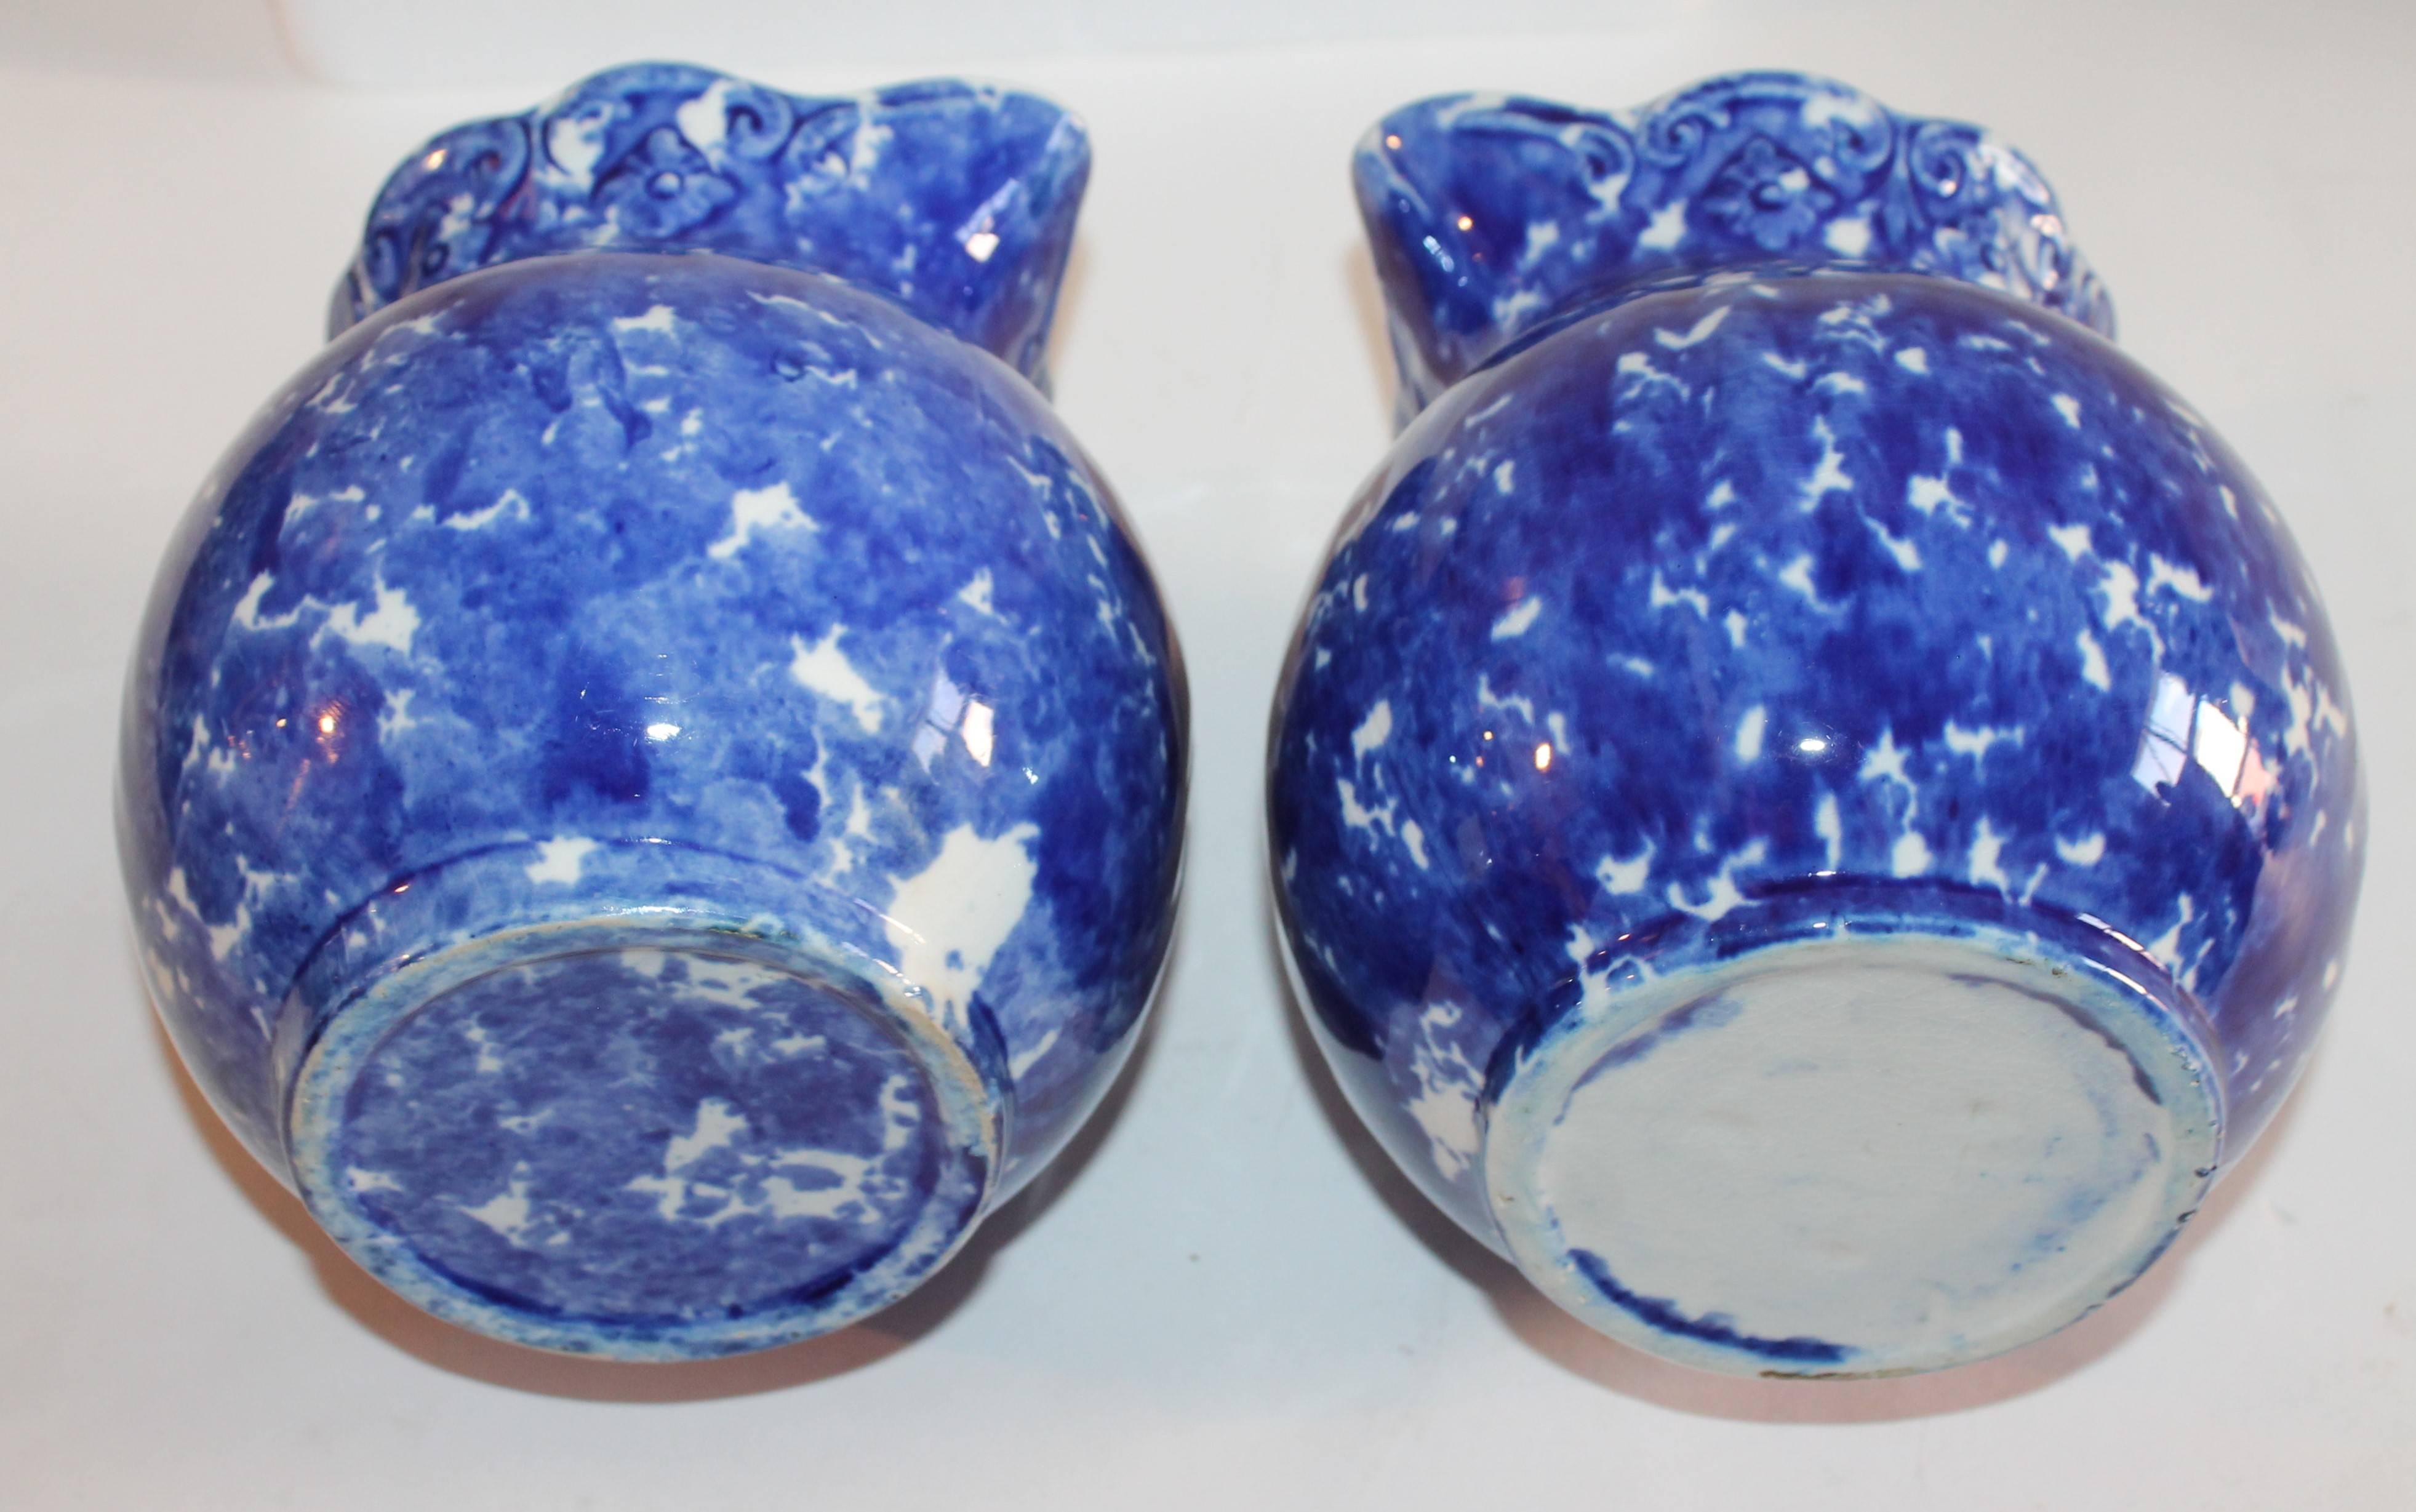 Sponge Ware Pottery Pitchers, 19th Century, Pair For Sale 3